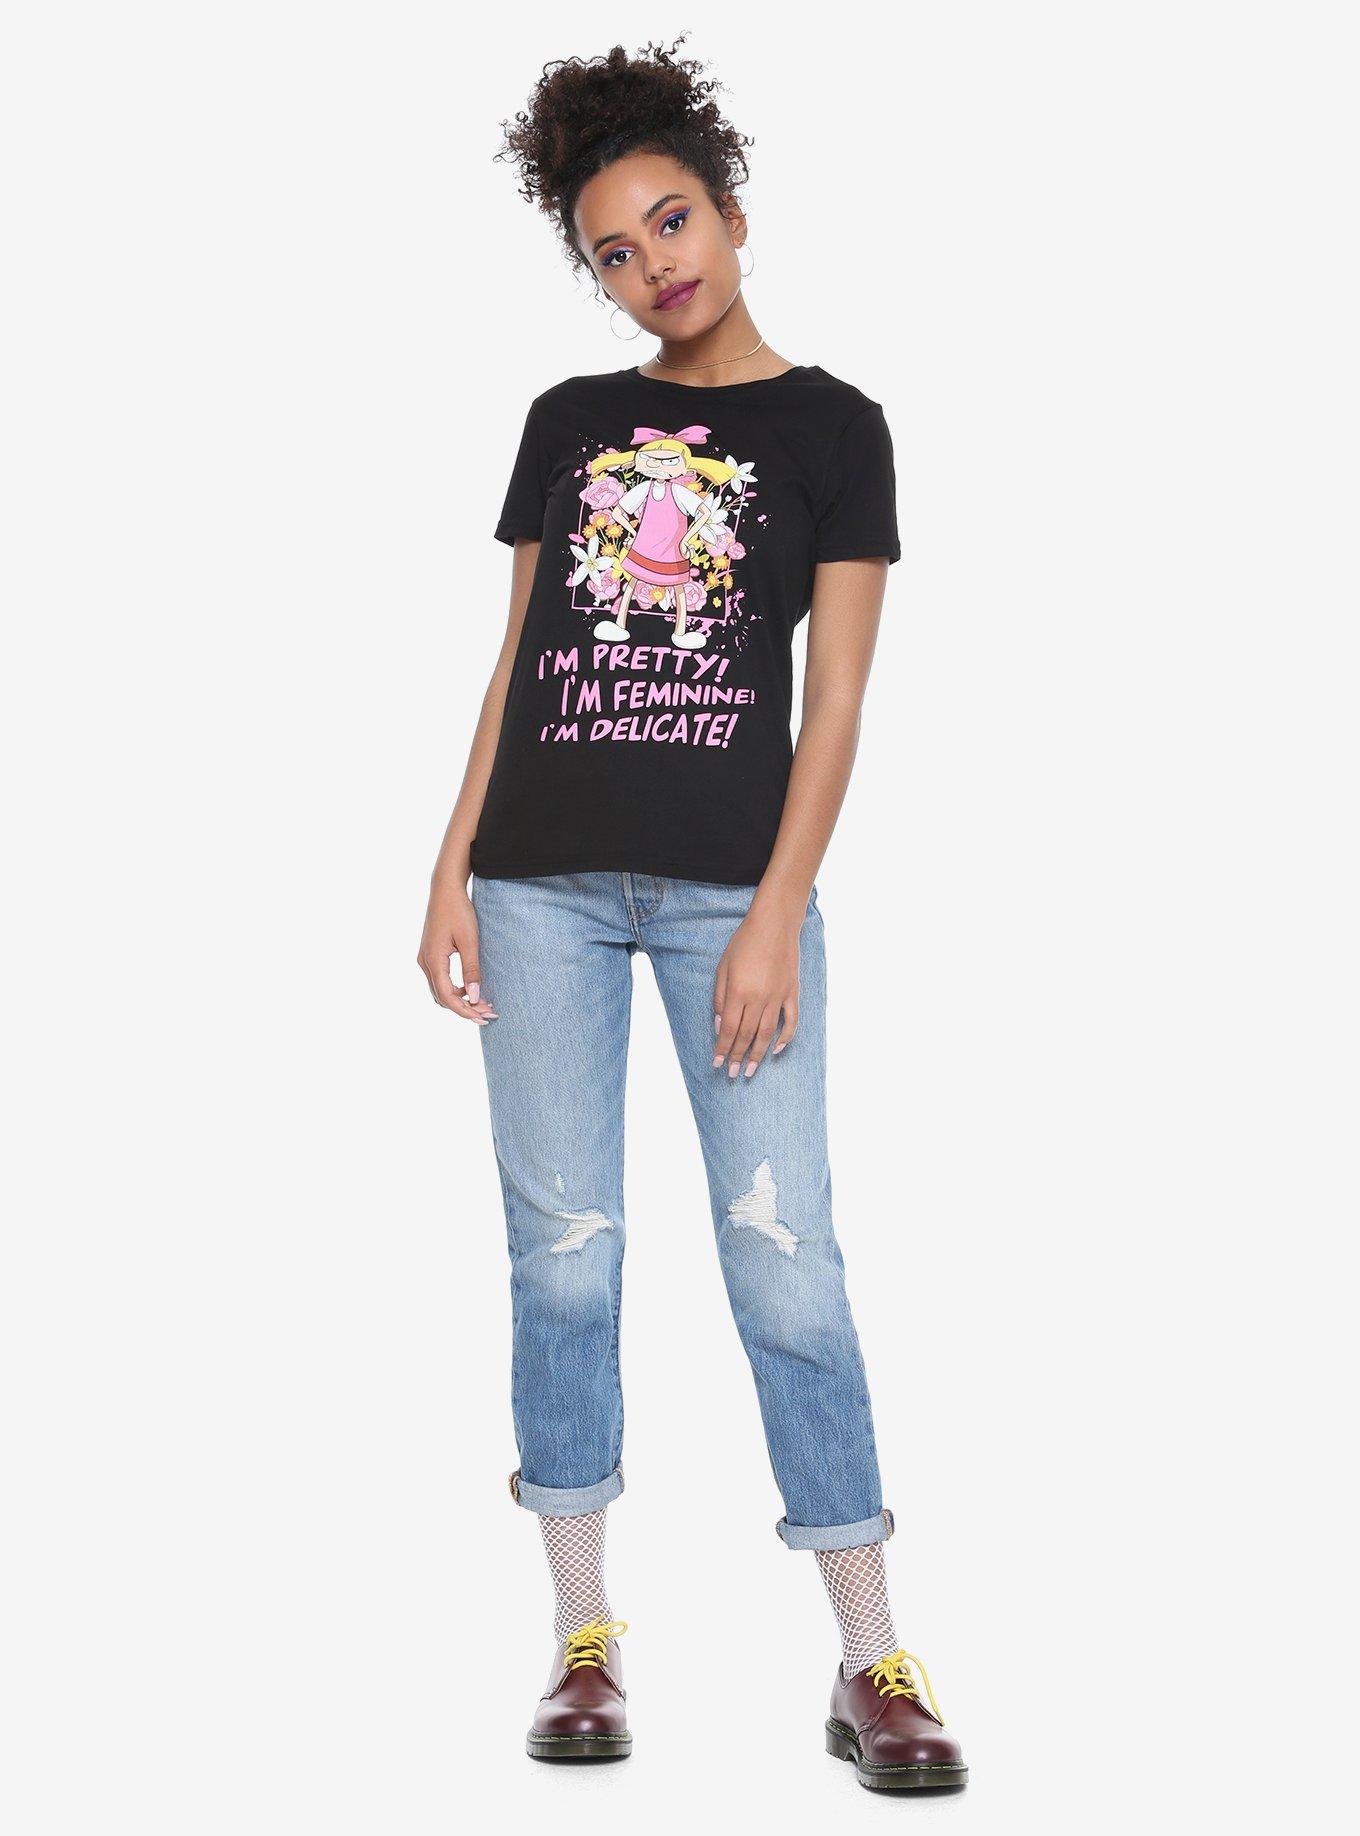 Hey Arnold! Helga I Am Too A Girl Girls T-Shirt Hot Topic Exclusive, , alternate